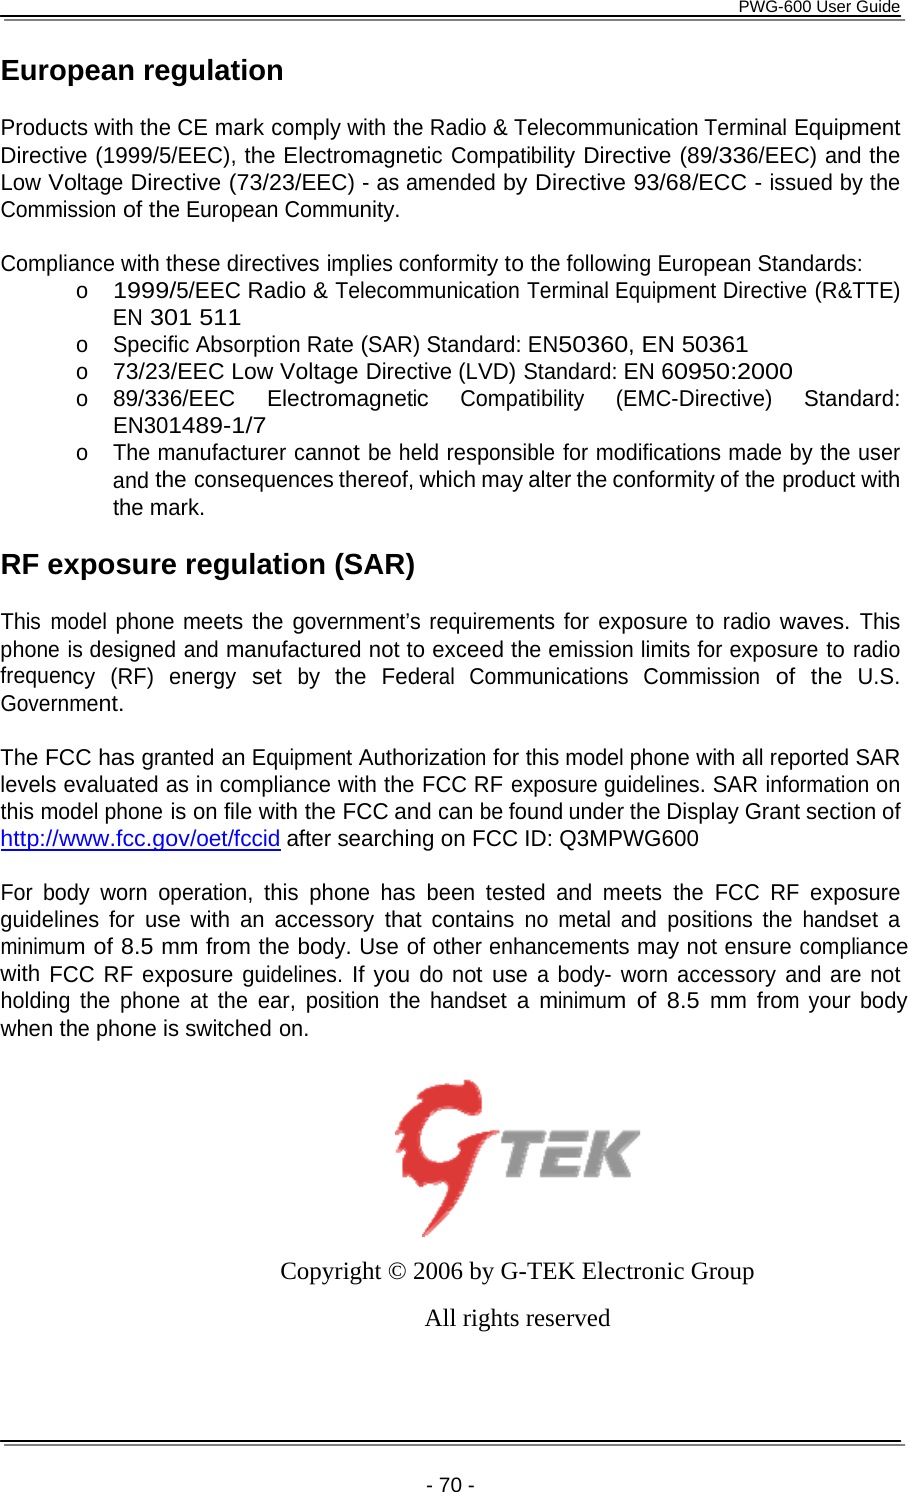      PWG-600 User Guide    - 70 - European regulation  Products with the CE mark comply with the Radio &amp; Telecommunication Terminal Equipment Directive (1999/5/EEC), the Electromagnetic Compatibility Directive (89/336/EEC) and the Low Voltage Directive (73/23/EEC) - as amended by Directive 93/68/ECC - issued by the Commission of the European Community.  Compliance with these directives implies conformity to the following European Standards: o 1999/5/EEC Radio &amp; Telecommunication Terminal Equipment Directive (R&amp;TTE) EN 301 511 o Specific Absorption Rate (SAR) Standard: EN50360, EN 50361 o 73/23/EEC Low Voltage Directive (LVD) Standard: EN 60950:2000 o 89/336/EEC Electromagnetic Compatibility (EMC-Directive) Standard: EN301489-1/7 o The manufacturer cannot be held responsible for modifications made by the user and the consequences thereof, which may alter the conformity of the product with the mark.  RF exposure regulation (SAR)  This model phone meets the government’s requirements for exposure to radio waves. This phone is designed and manufactured not to exceed the emission limits for exposure to radio frequency (RF) energy set by the Federal Communications Commission of the U.S. Government.  The FCC has granted an Equipment Authorization for this model phone with all reported SAR levels evaluated as in compliance with the FCC RF exposure guidelines. SAR information on this model phone is on file with the FCC and can be found under the Display Grant section of http://www.fcc.gov/oet/fccid after searching on FCC ID: Q3MPWG600 For body worn operation, this phone has been tested and meets the FCC RF exposure guidelines for use with an accessory that contains no metal and positions the handset a minimum of 8.5 mm from the body. Use of other enhancements may not ensure compliance with FCC RF exposure guidelines. If you do not use a body- worn accessory and are not holding the phone at the ear, position the handset a minimum of 8.5 mm from your body when the phone is switched on.    Copyright © 2006 by G-TEK Electronic Group All rights reserved   